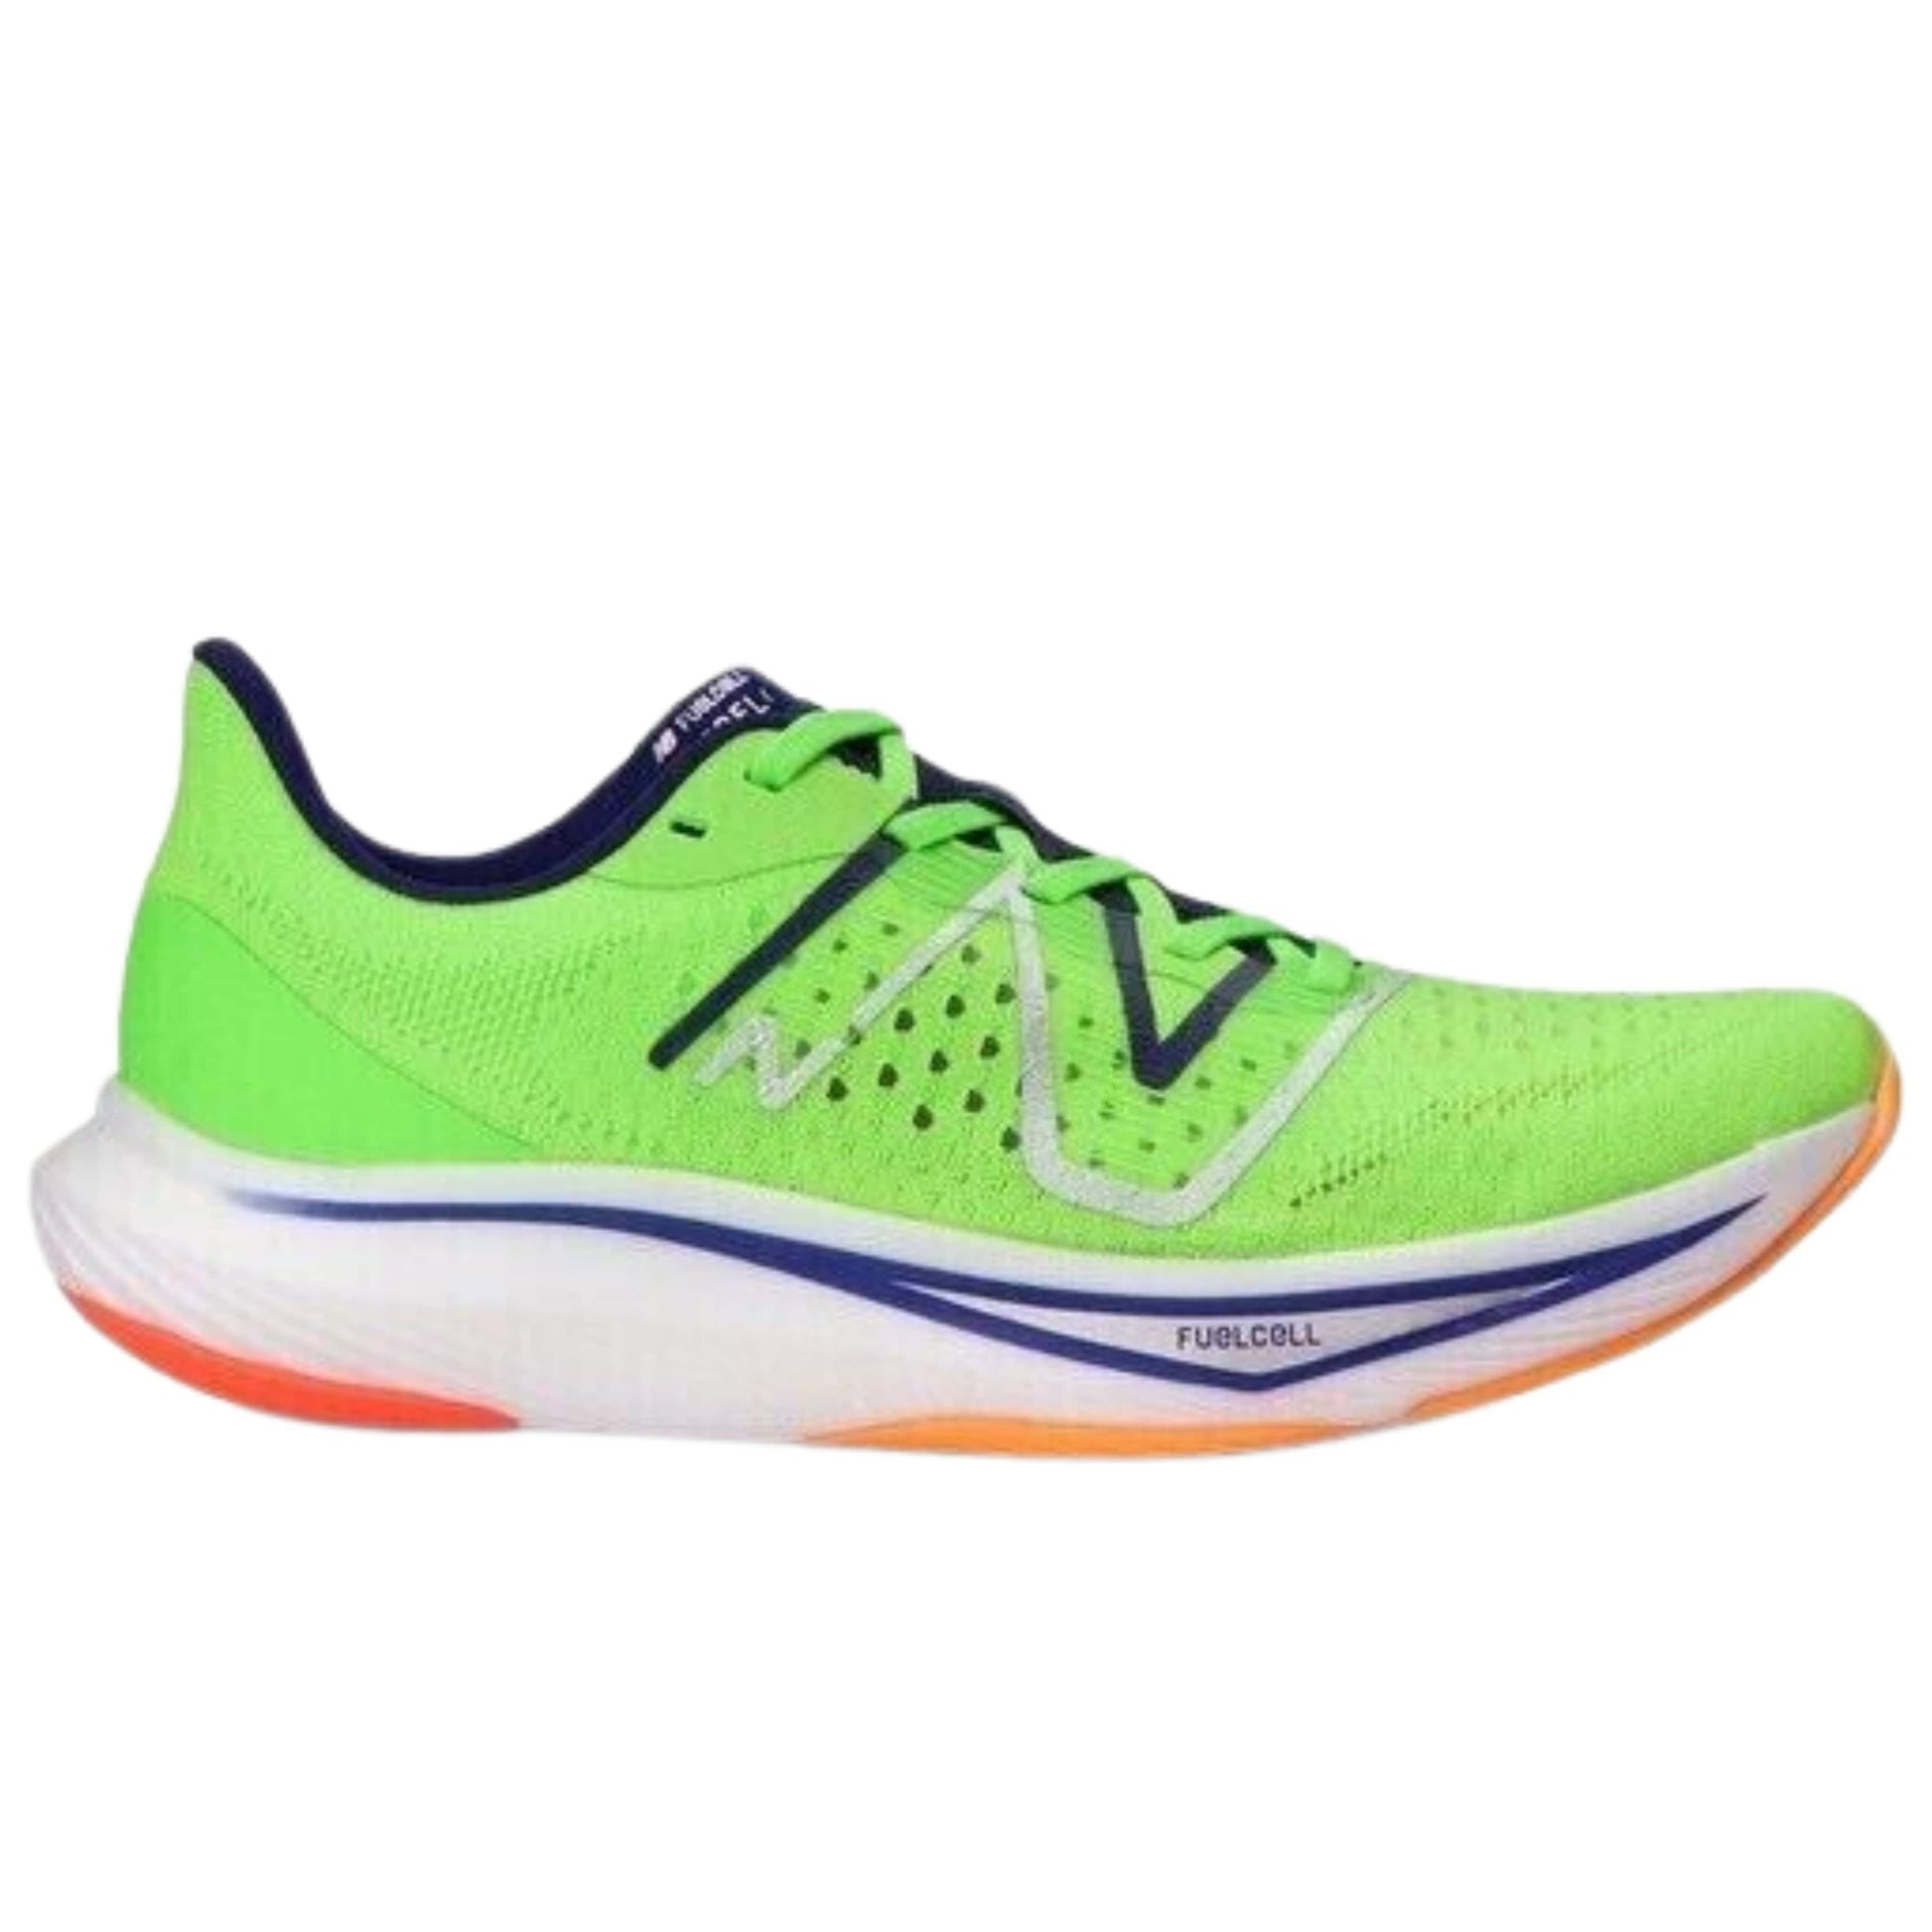 NEW BALANCE Athletic Shoes NEW BALANCE - Fuelcell Rebel V3 MFCXMM3 Green Men's 9.5 D Running Shoes